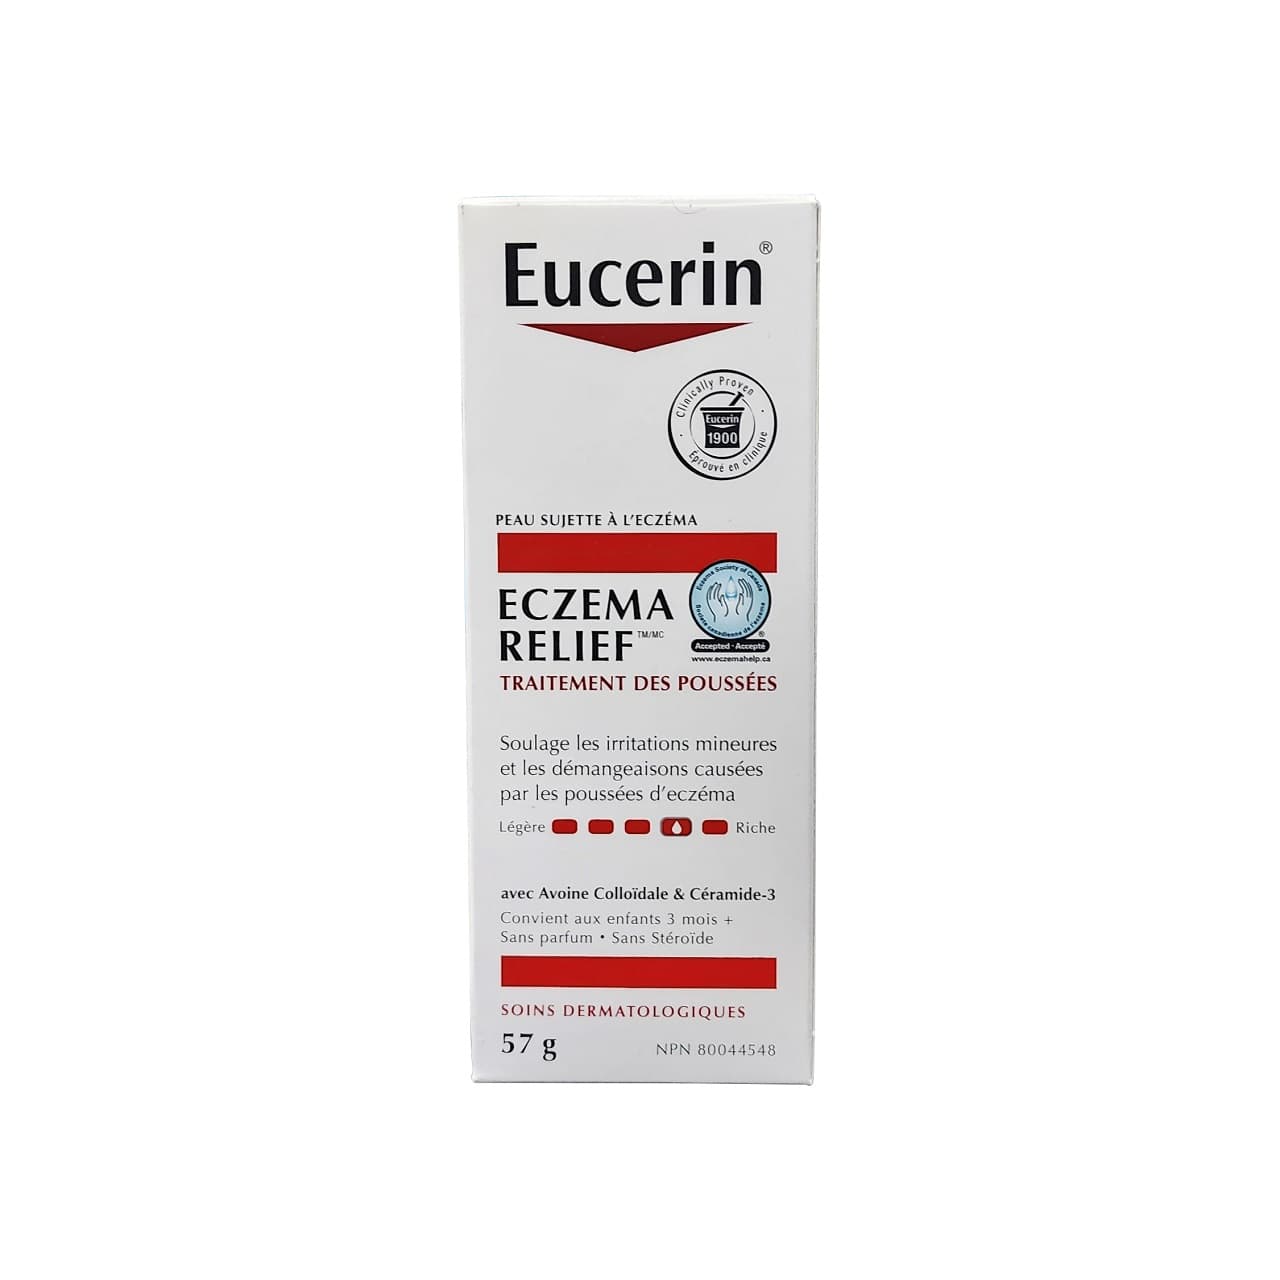 Product label for Eucerin Eczema Relief Flare Up Treatment (57 grams) in French